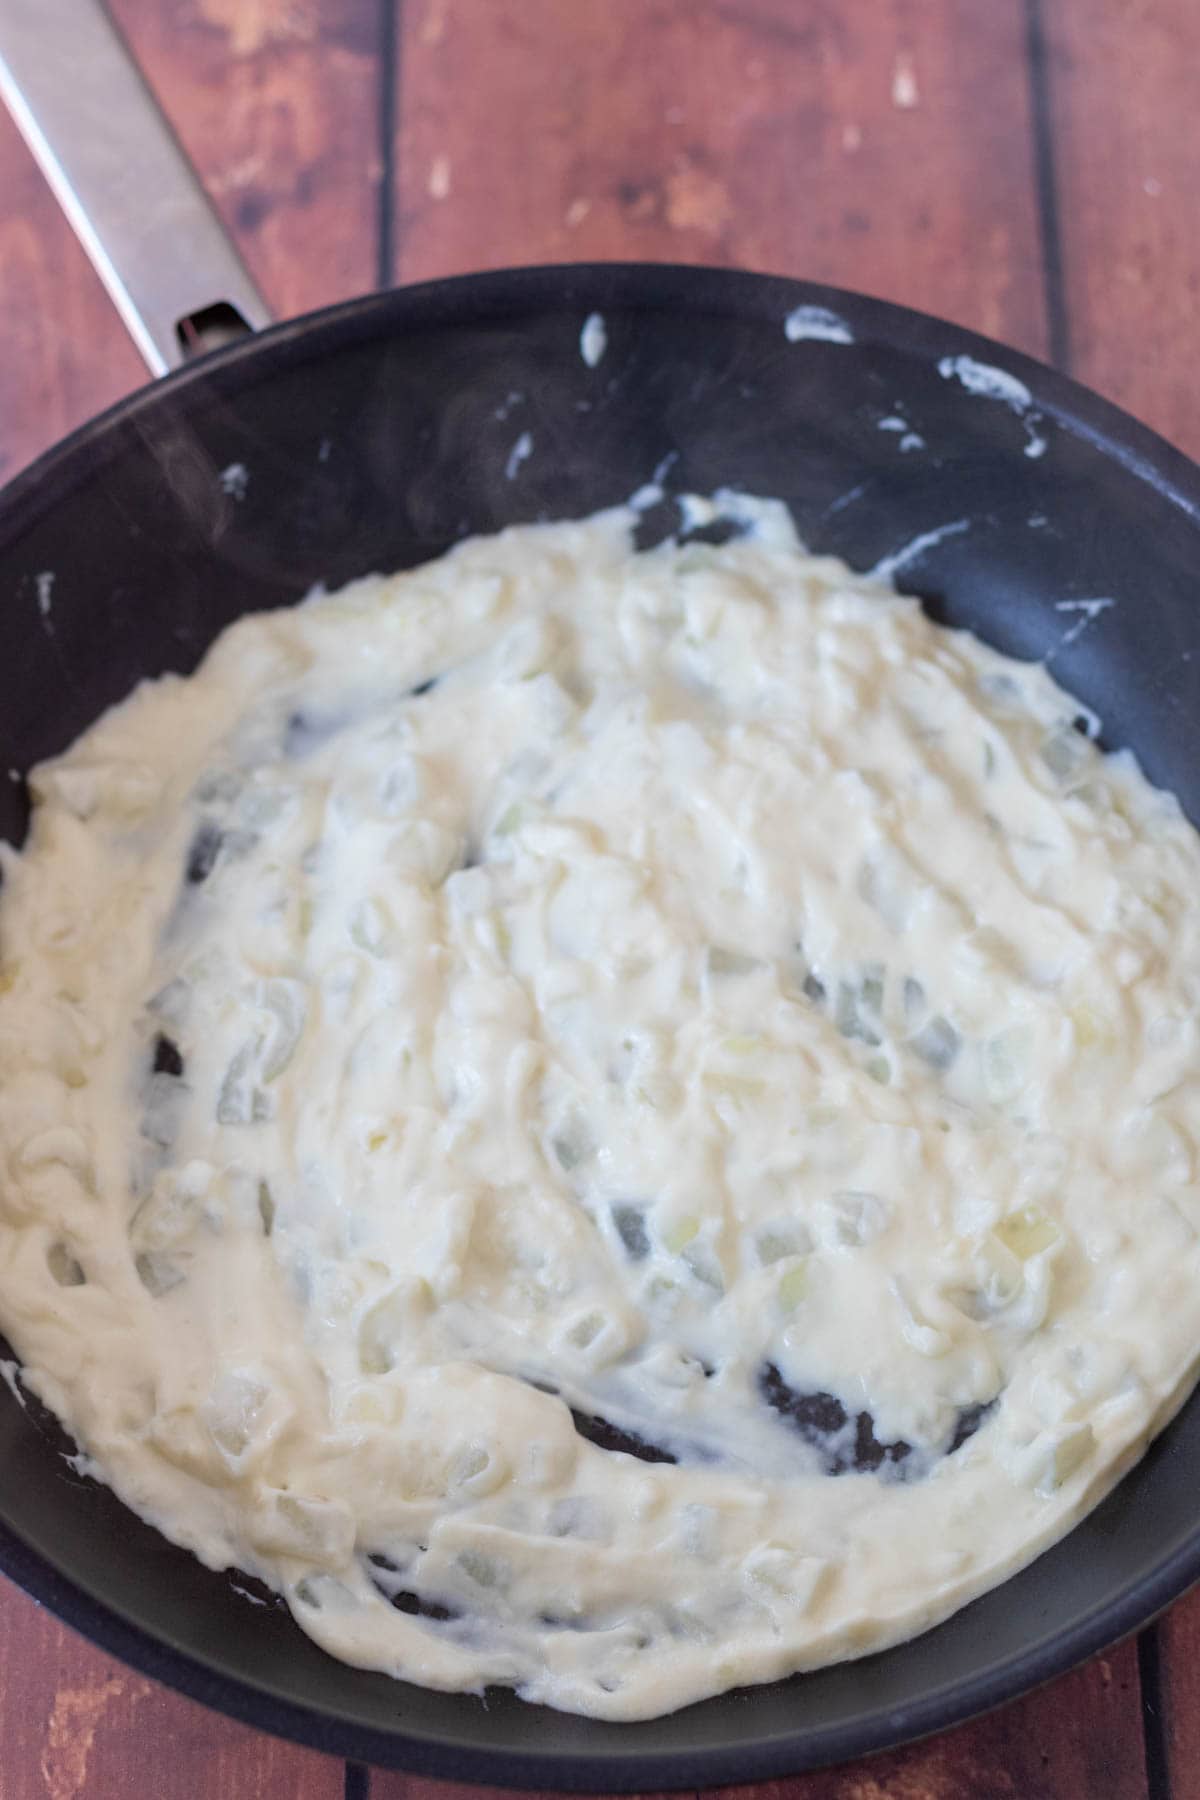 Crème fraiche and lemon juice stirred into the pan with the sauted onion and garlic.